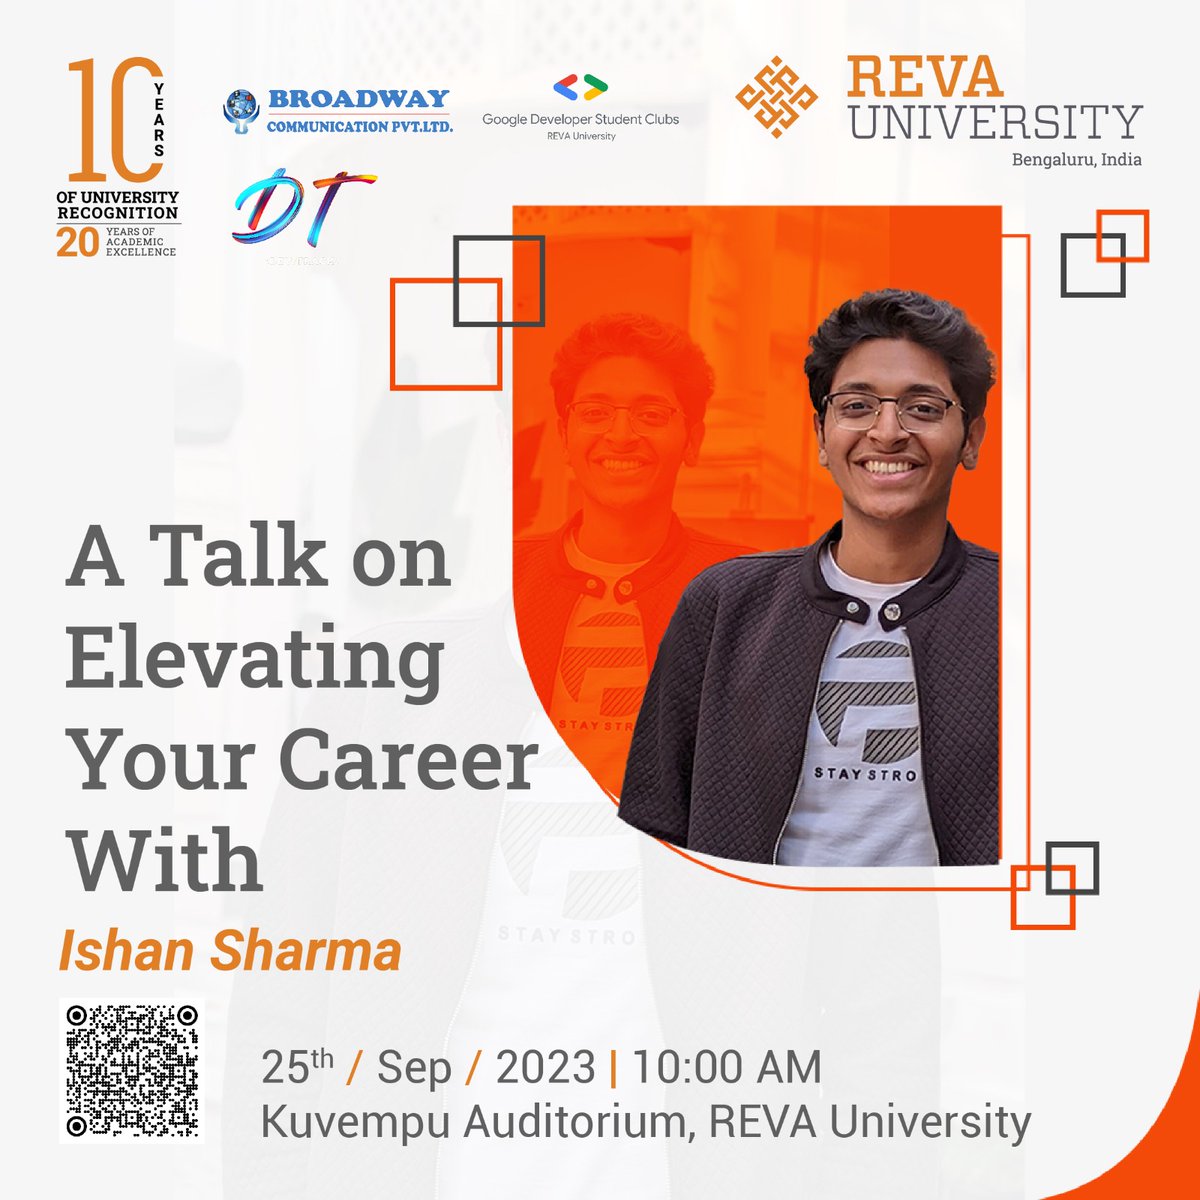 Ready to Elevate Your Career?  Join us for an inspiring talk with Ishan Sharma on September 25, 2023, at 10:00 AM in Kuvempu Auditorium, REVA University. Get ready for insights and motivation!  #CareerTalk #REVAUniversity #ElevateYourCareer #LifeatREVA #Careerdevelopment